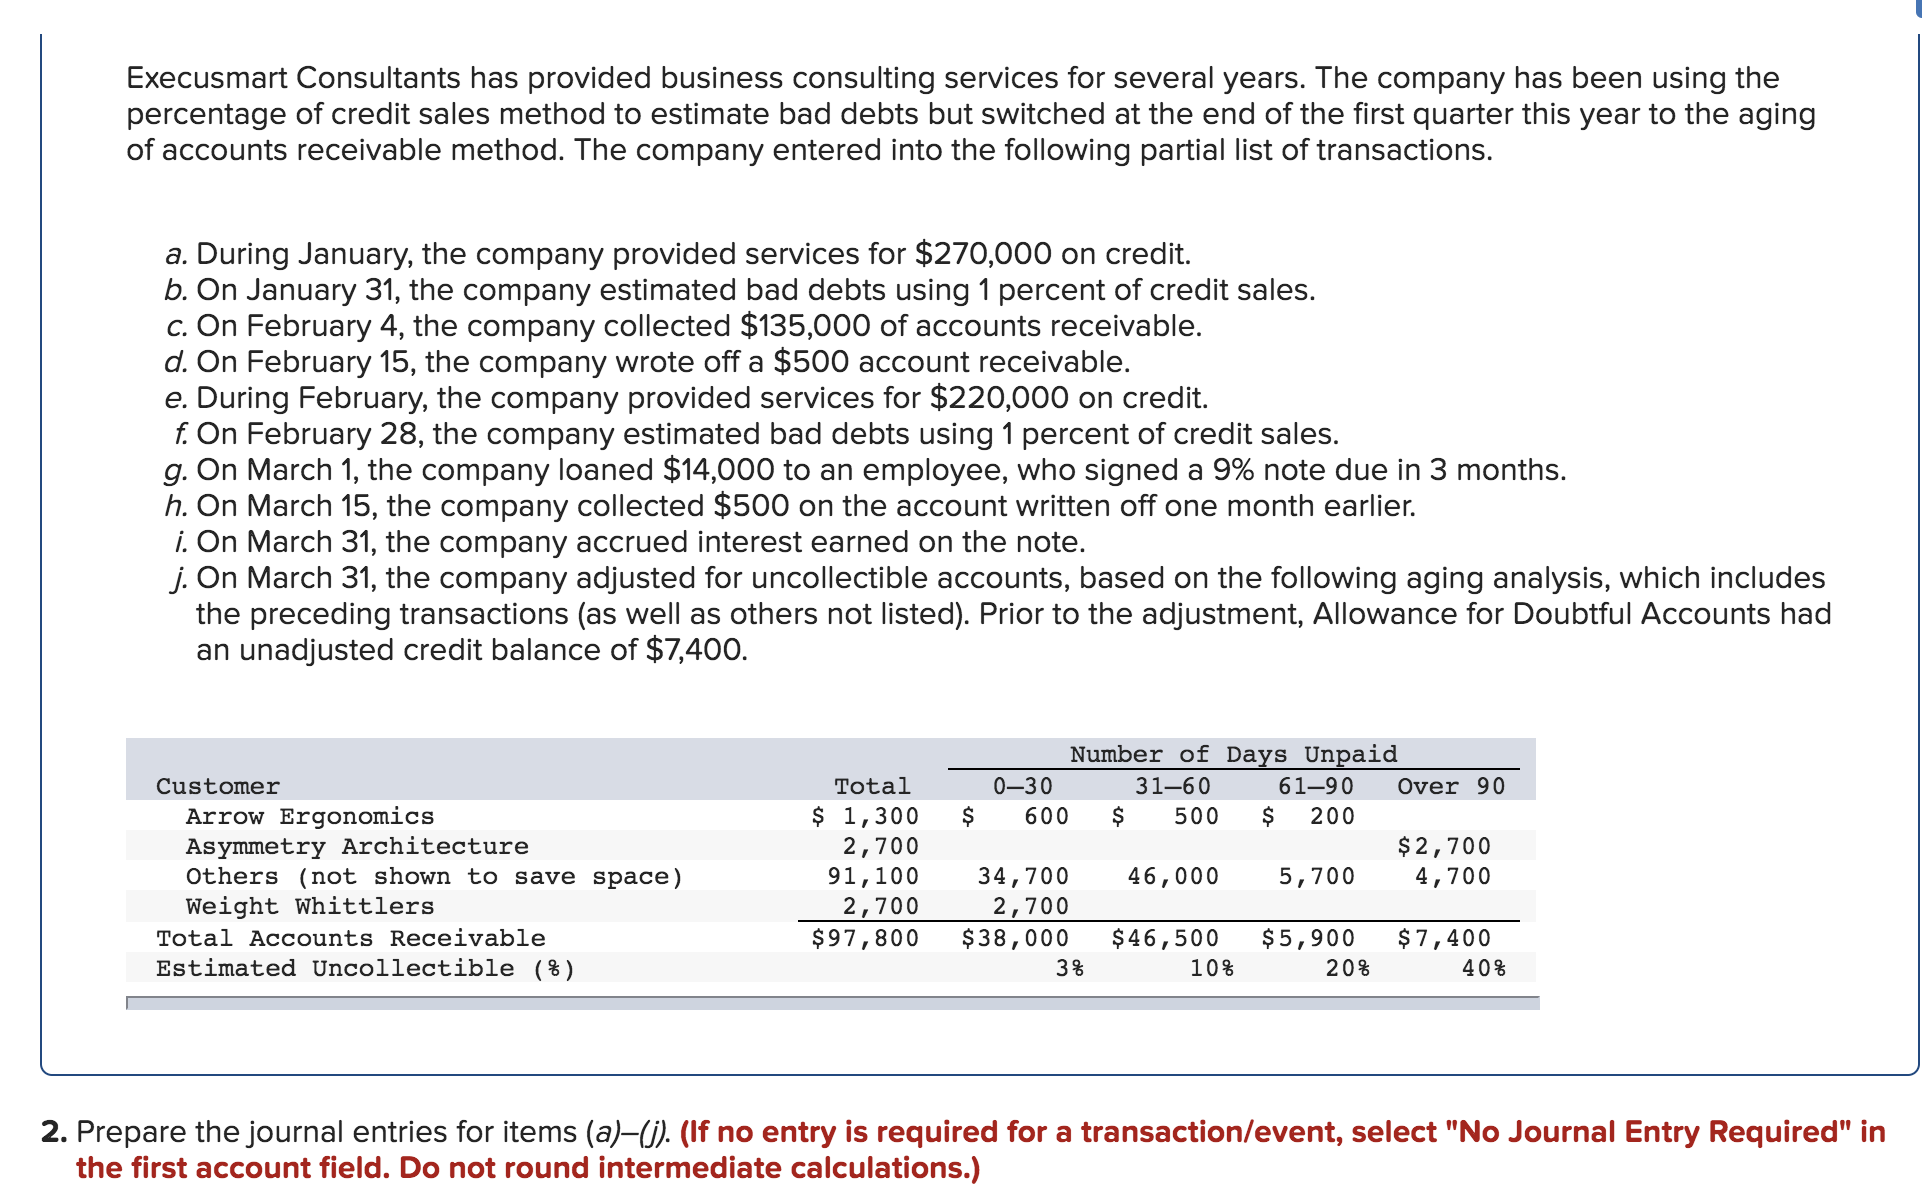 Execusmart Consultants has provided business consulting services for several years. The company has been using the
percentage of credit sales method to estimate bad debts but switched at the end of the first quarter this year to the aging
of accounts receivable method. The company entered into the following partial list of transactions.
a. During January, the company provided services for $270,000 on credit.
b. On January 31, the company estimated bad debts using 1 percent of credit sales.
c. On February 4, the company collected $135,000 of accounts receivable.
d. On February 15, the company wrote off a $500 account receivable.
e. During February, the company provided services for $220,000 on credit.
f. On February 28, the company estimated bad debts using 1 percent of credit sales.
g. On March 1, the company loaned $14,000 to an employee, who signed a 9% note due in 3 months.
h. On March 15, the company collected $500 on the account written off one month earlier.
i. On March 31, the company accrued interest earned on the note.
j. On March 31, the company adjusted for uncollectible accounts, based on the following aging analysis, which includes
the preceding transactions (as well as others not listed). Prior to the adjustment, Allowance for Doubtful Accounts had
an unadjusted credit balance of $7,400.
Number of Days Unpaid
0-30
Over 90
31-60
61-90
Customer
Total
$ 1,300
2,700
91,100
2,700
$97,800
Arrow Ergonomics
Asymmetry Architecture
Others (not shown to save space)
Weight Whittlers
600
500
200
$2,700
4,700
34,700
2,700
$38,000
46,000
5,700
Total Accounts Receivable
$46,500
$5,900
$7,400
Estimated Uncollectible (%)
3%
10%
20%
40%
2. Prepare the journal entries for items (a)-(j). (If no entry is required for a transaction/event, select "No Journal Entry Required" in
the first account field. Do not round intermediate calculations.)
